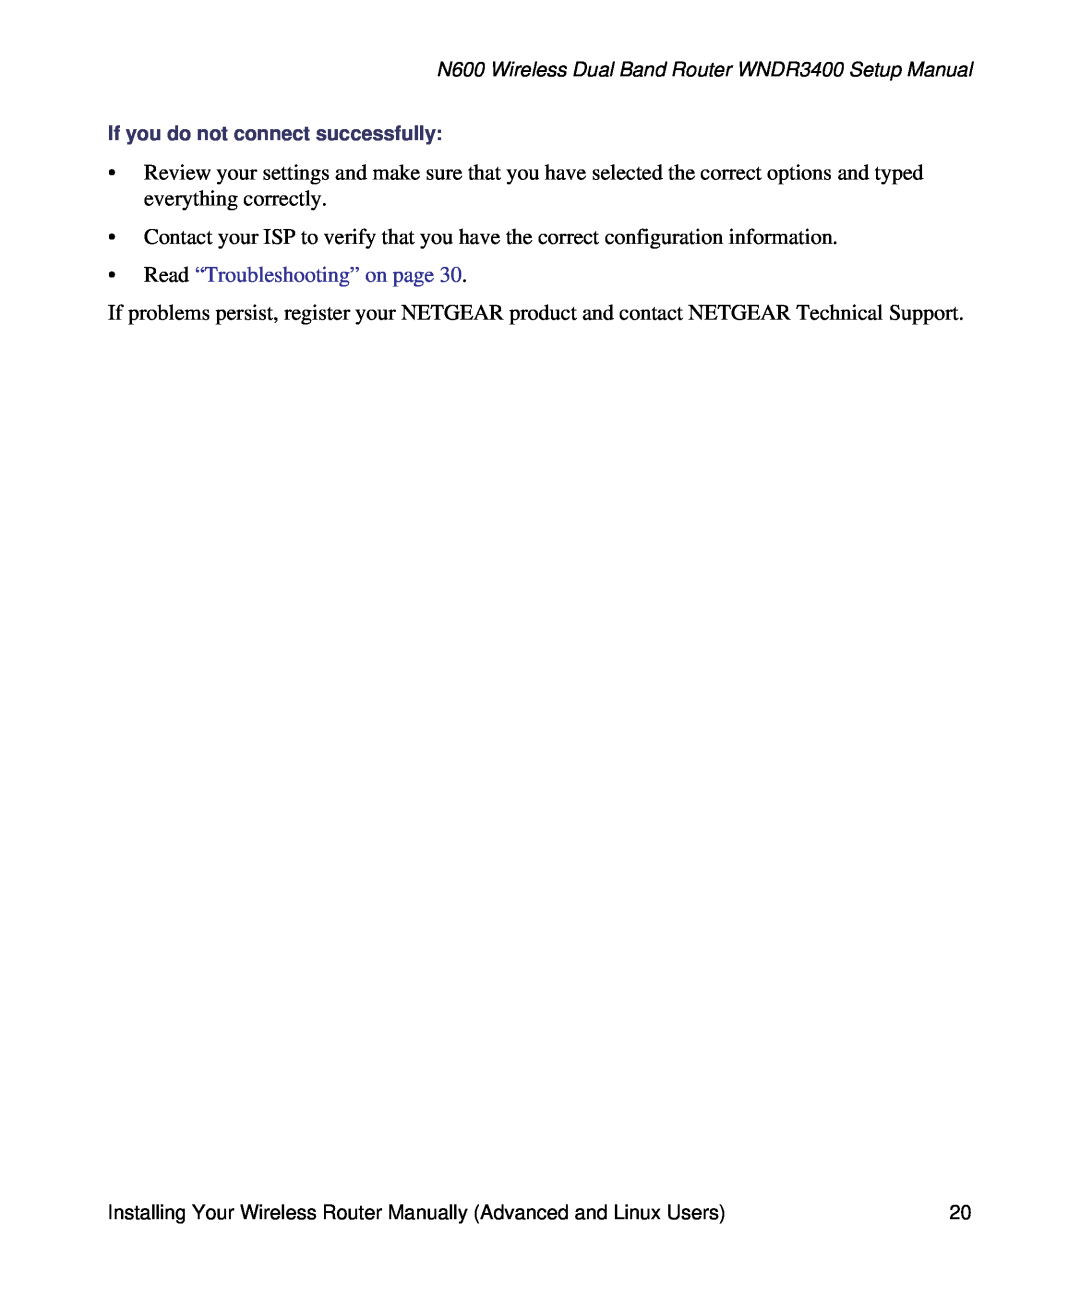 NETGEAR WNDR3400-100NAS manual Read “Troubleshooting” on page, If you do not connect successfully 